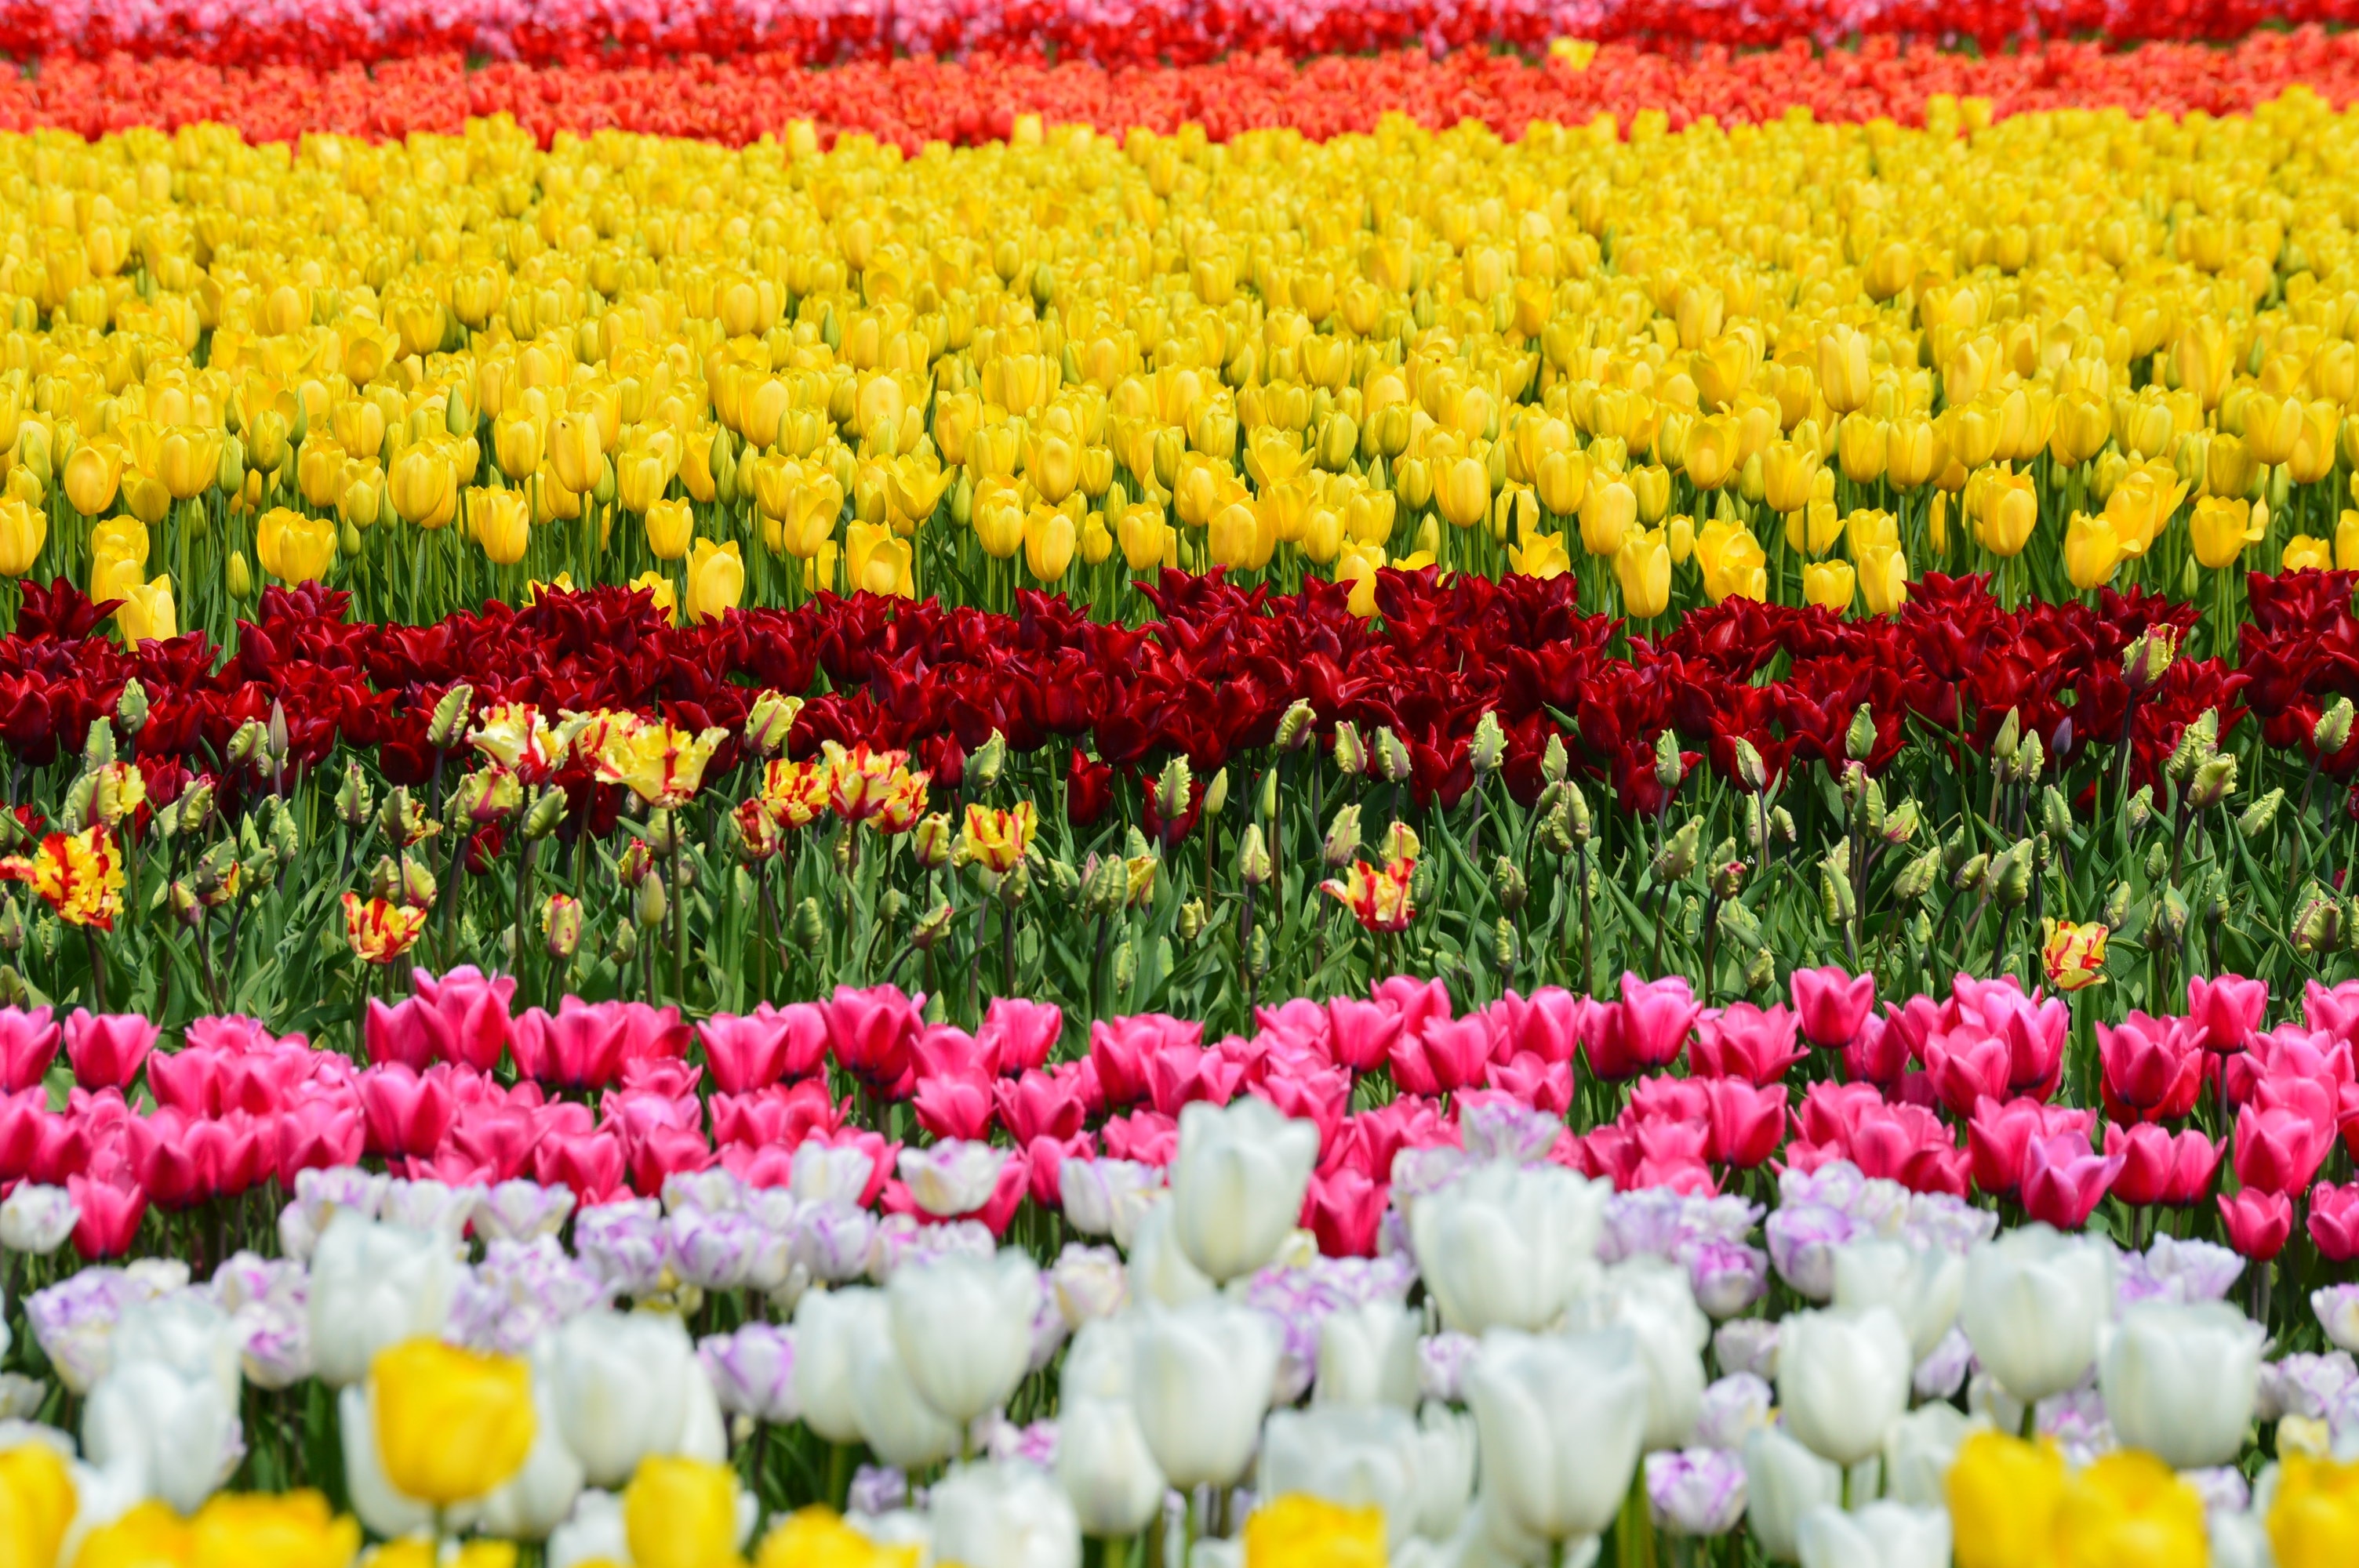 yellow, white and red tulips